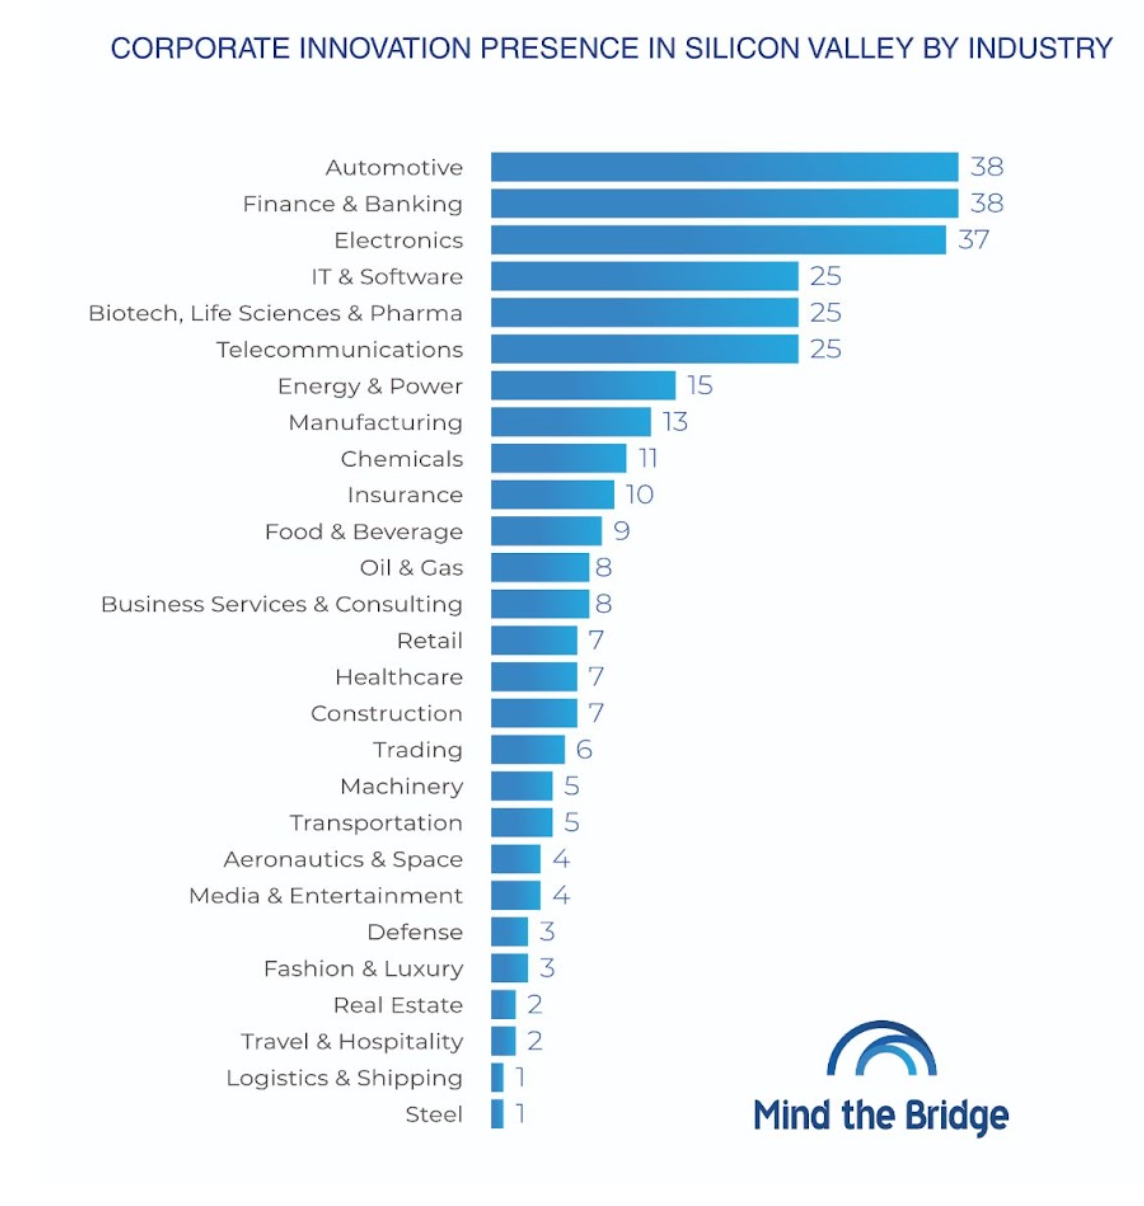 Corporate innovation activity in Silicon Valley, by industry